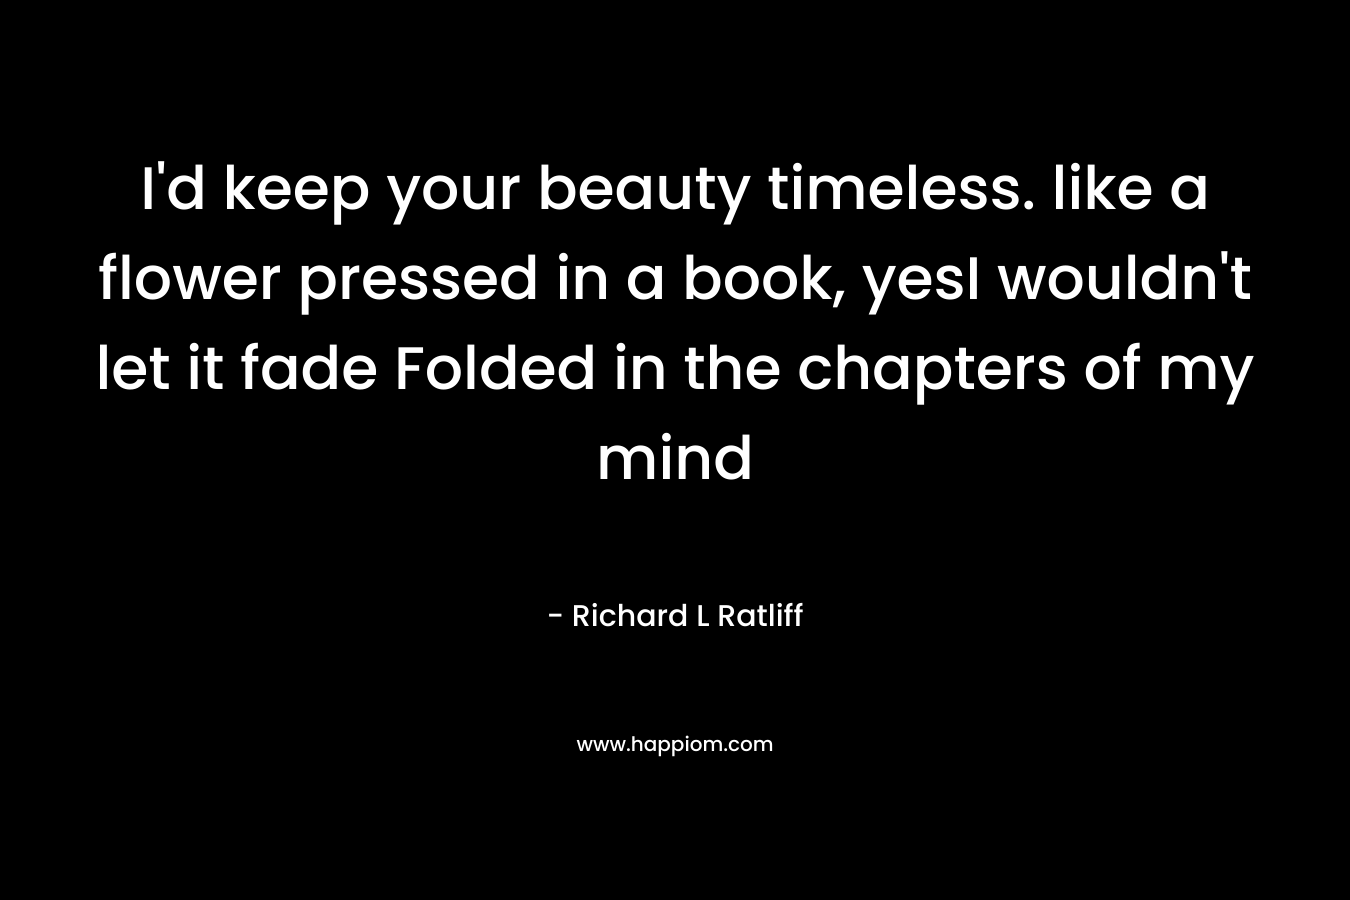 I'd keep your beauty timeless. like a flower pressed in a book, yesI wouldn't let it fade Folded in the chapters of my mind